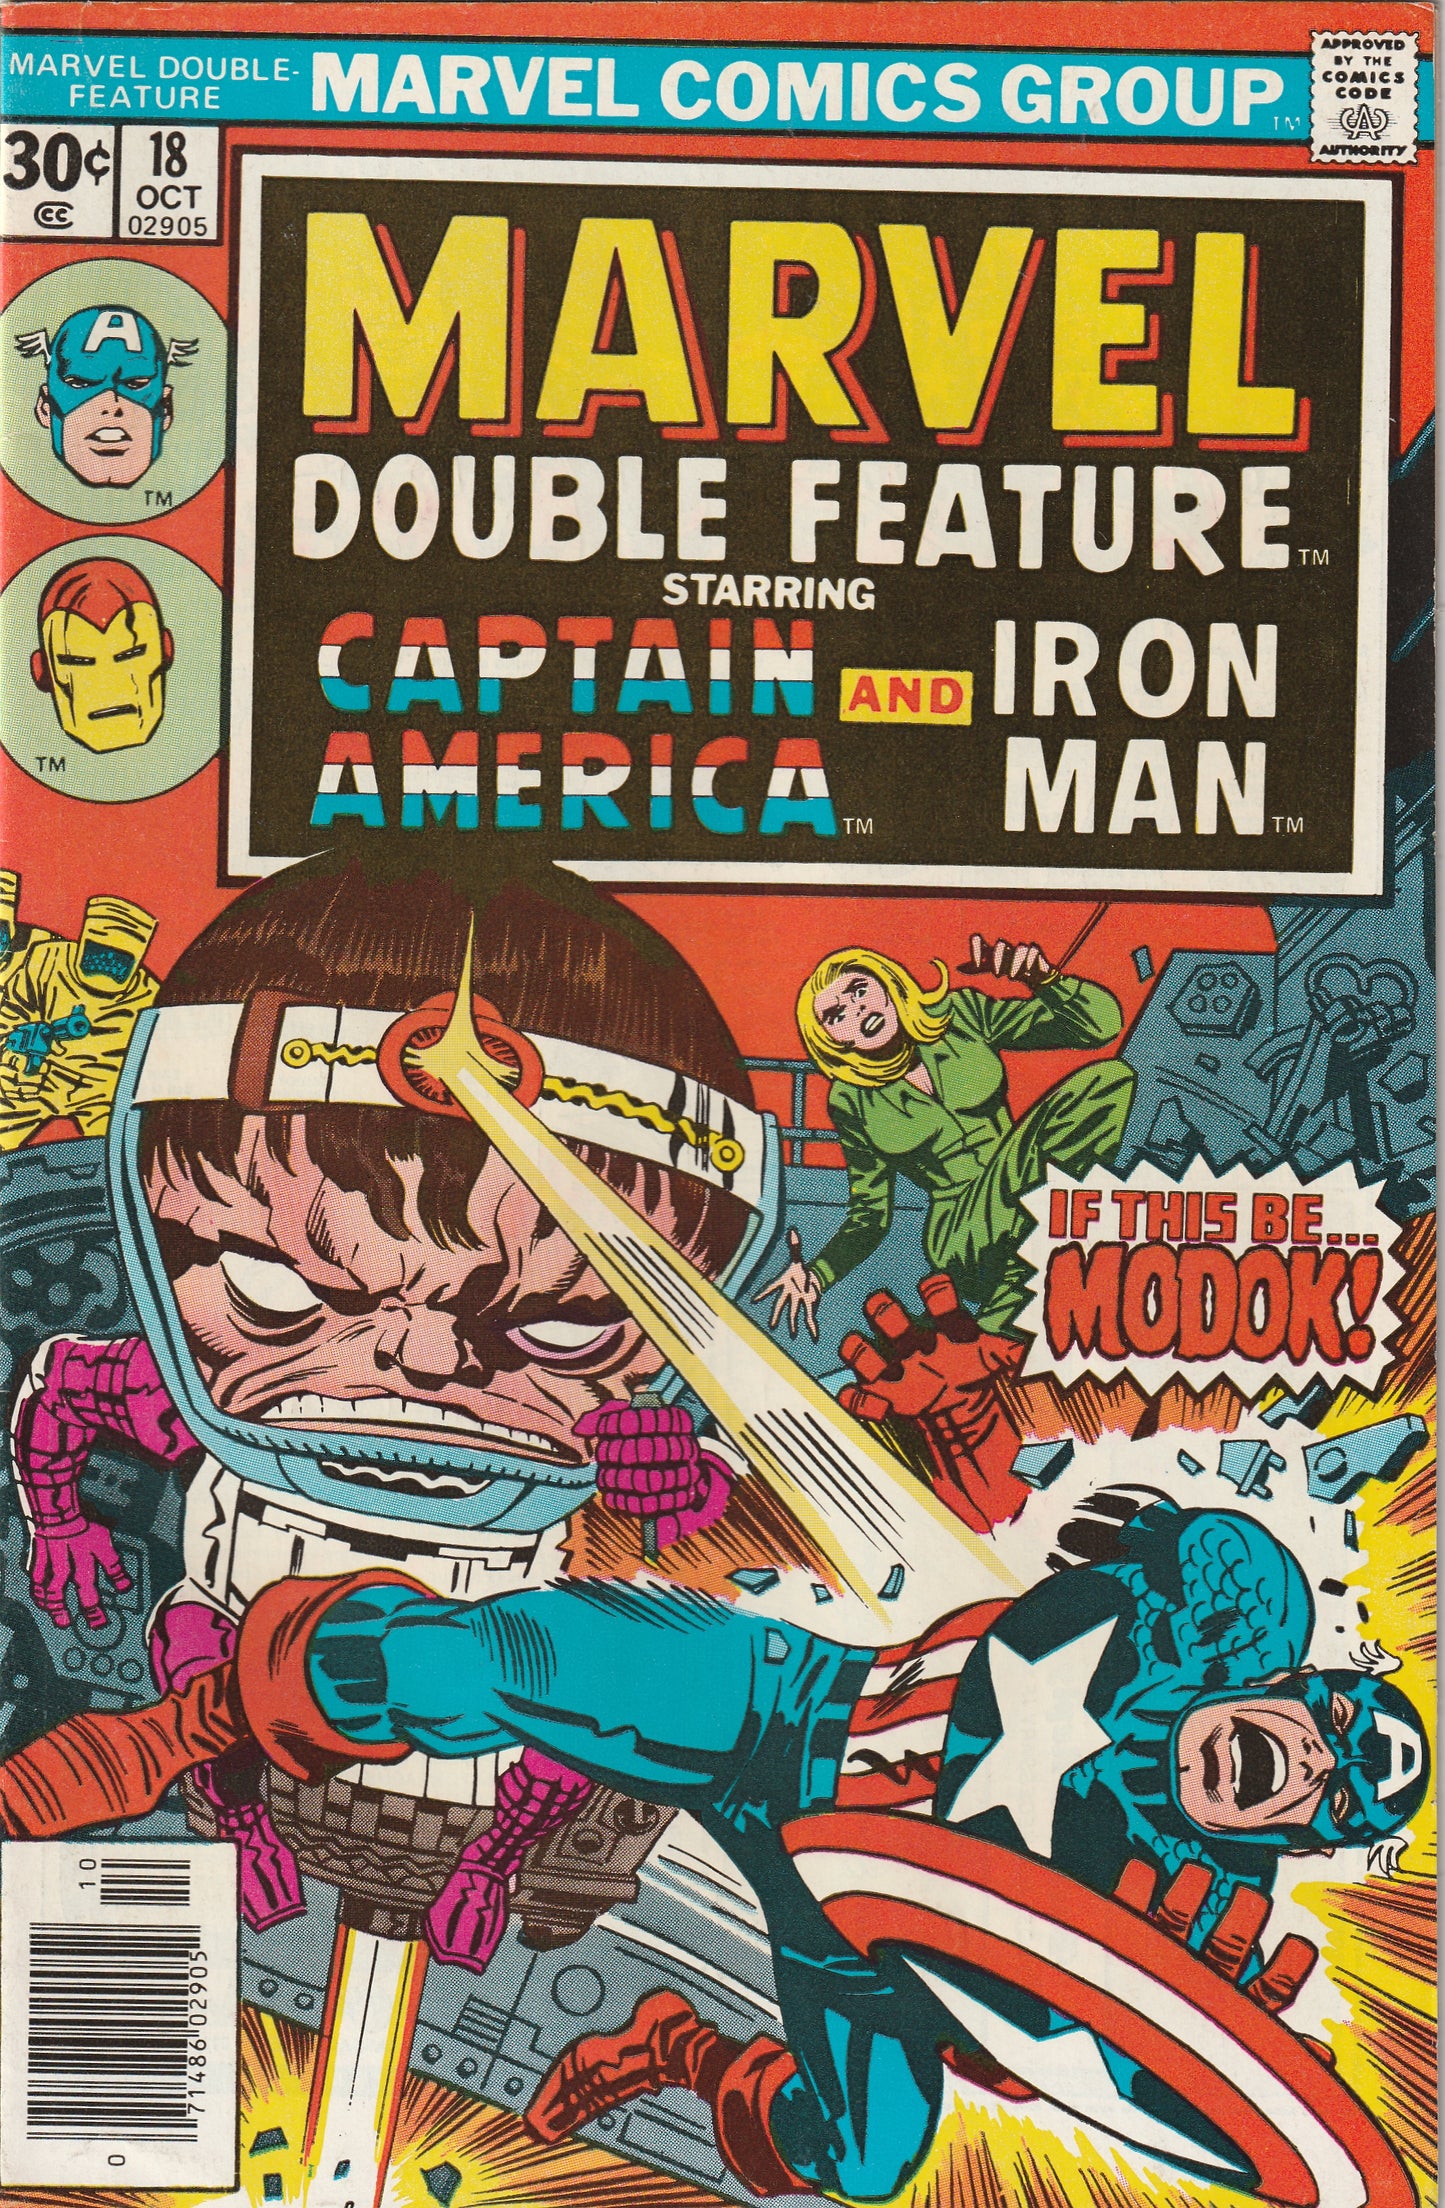 Marvel Double Feature #18 (1976) Featuring Captain America and Iron Man